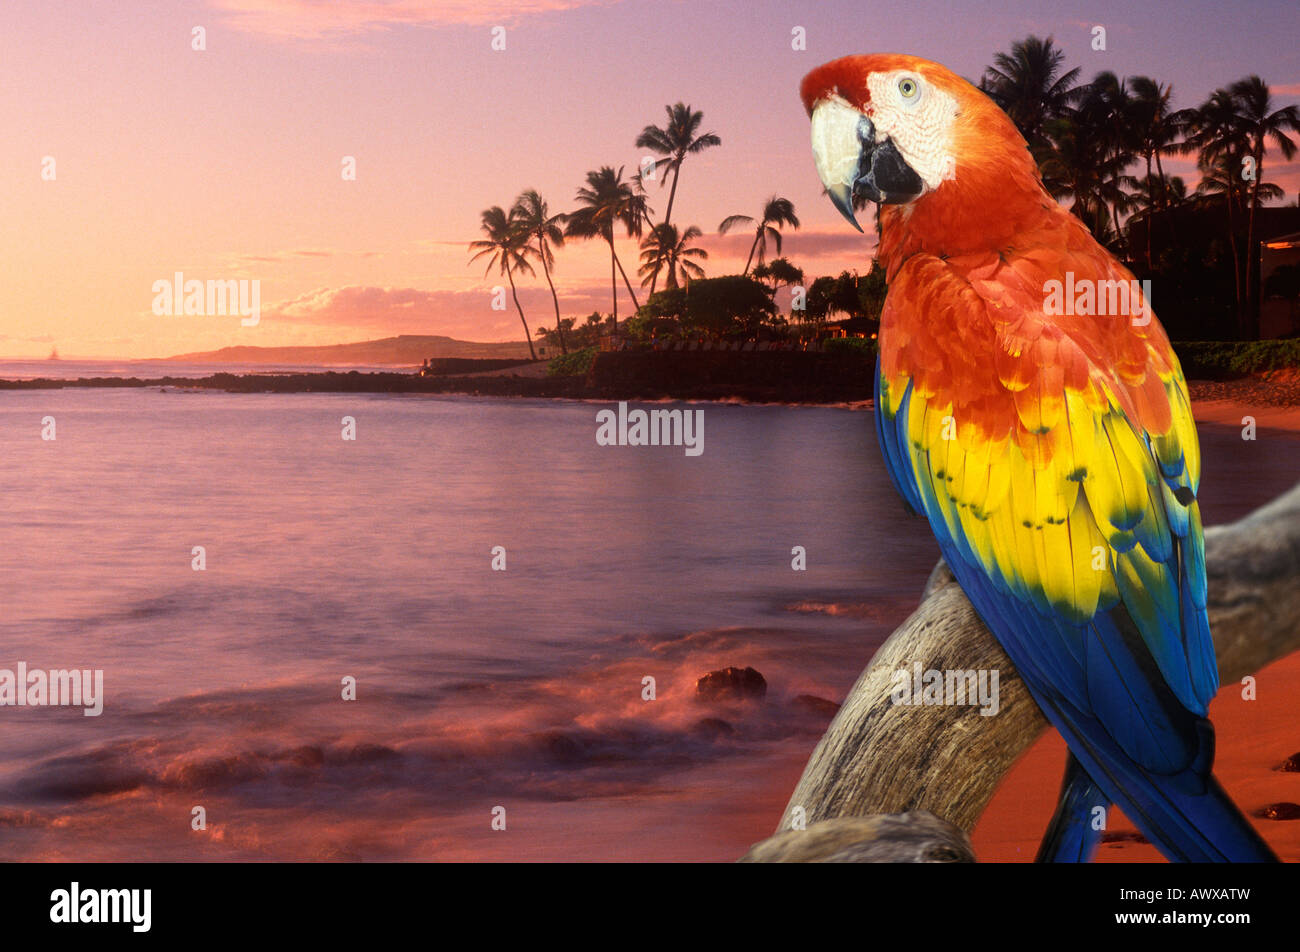 Composite panoramic image of a colorful parrot and coastline in Hawaii at sunset Stock Photo